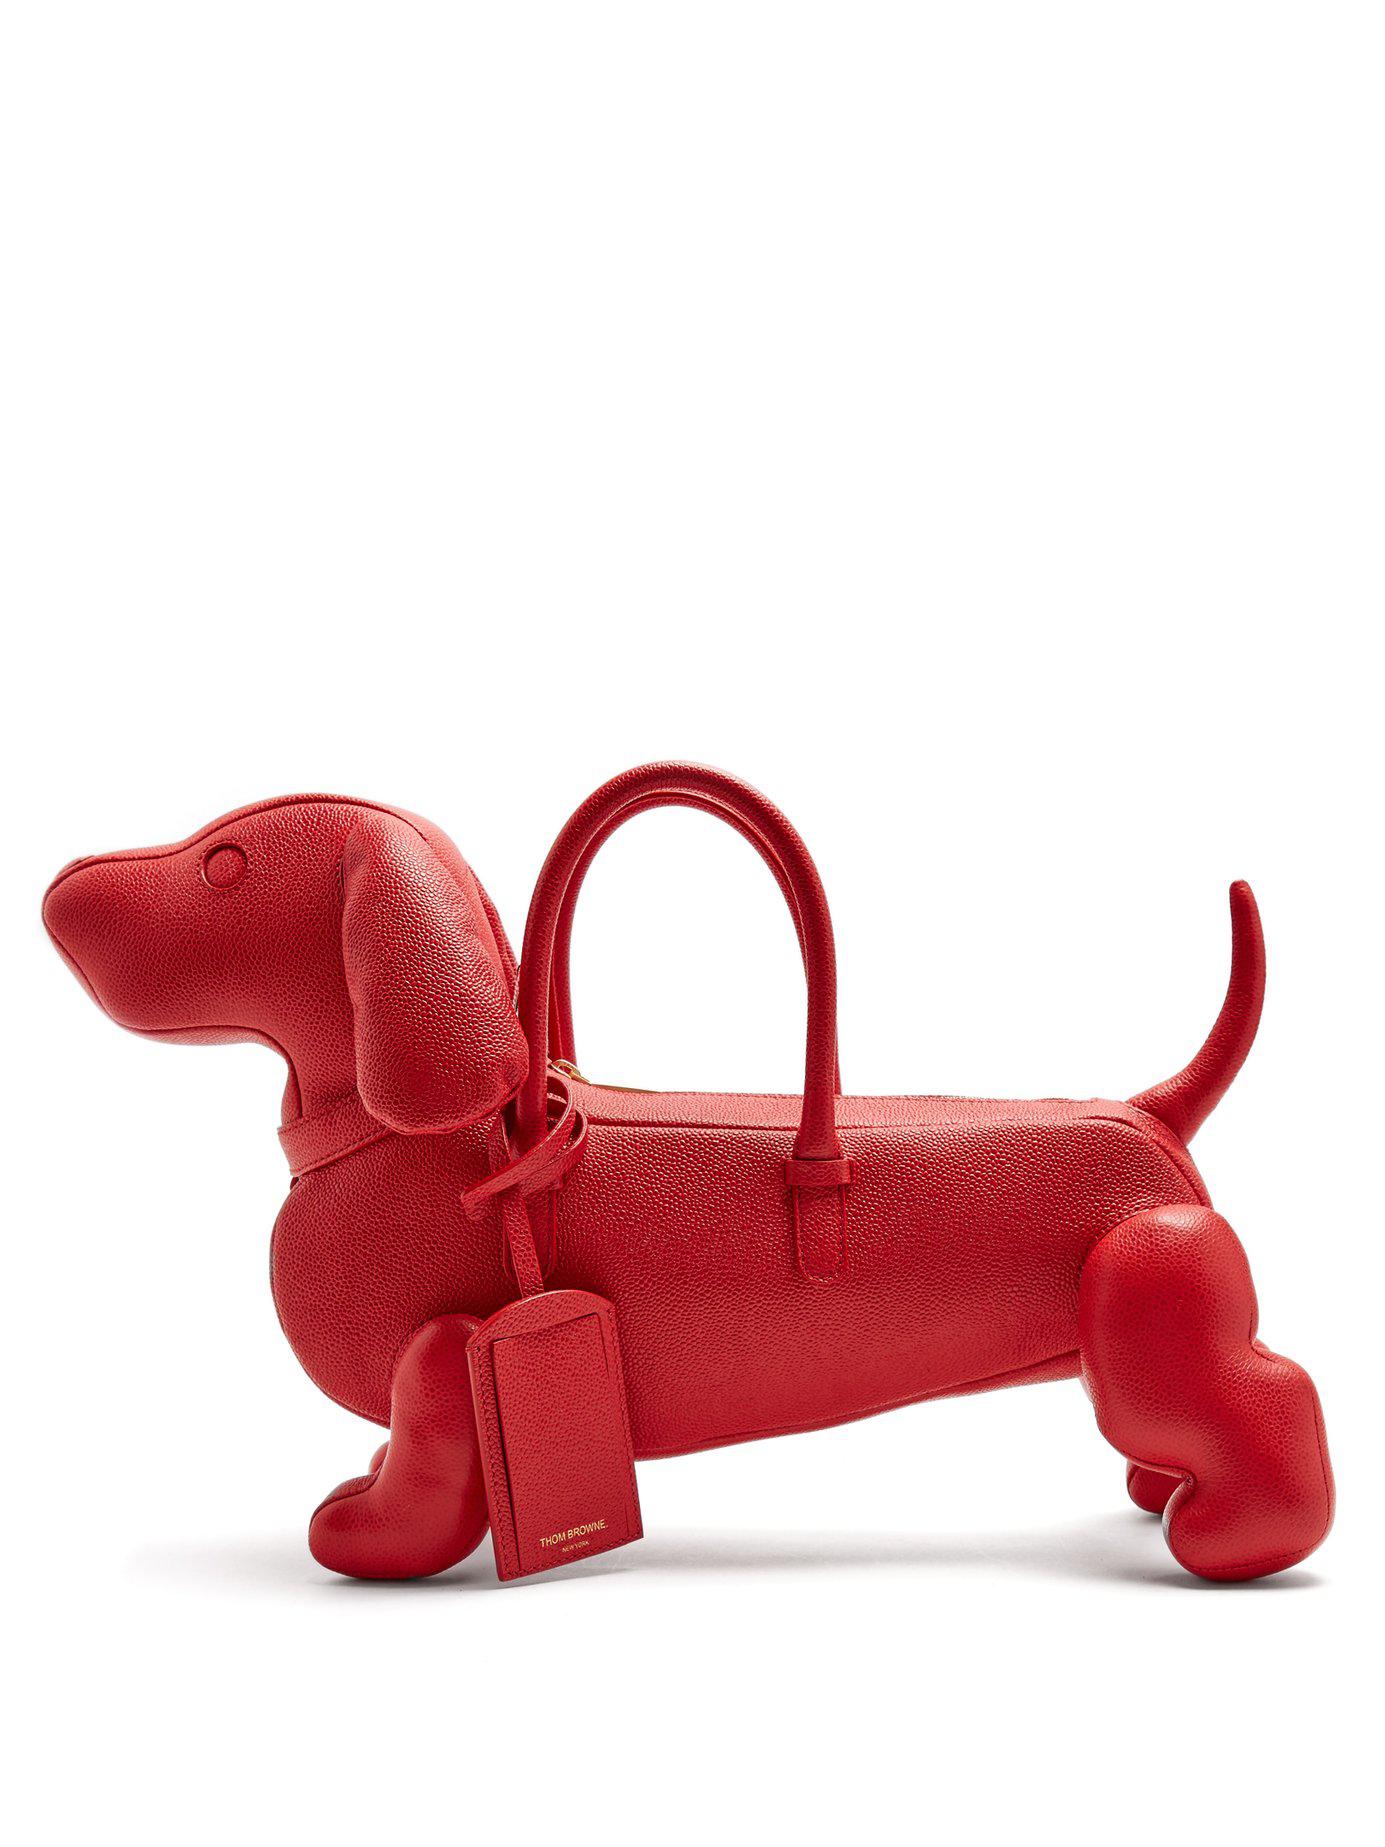 Thom Browne Hector Grained Leather Dog Bag in Red - Lyst